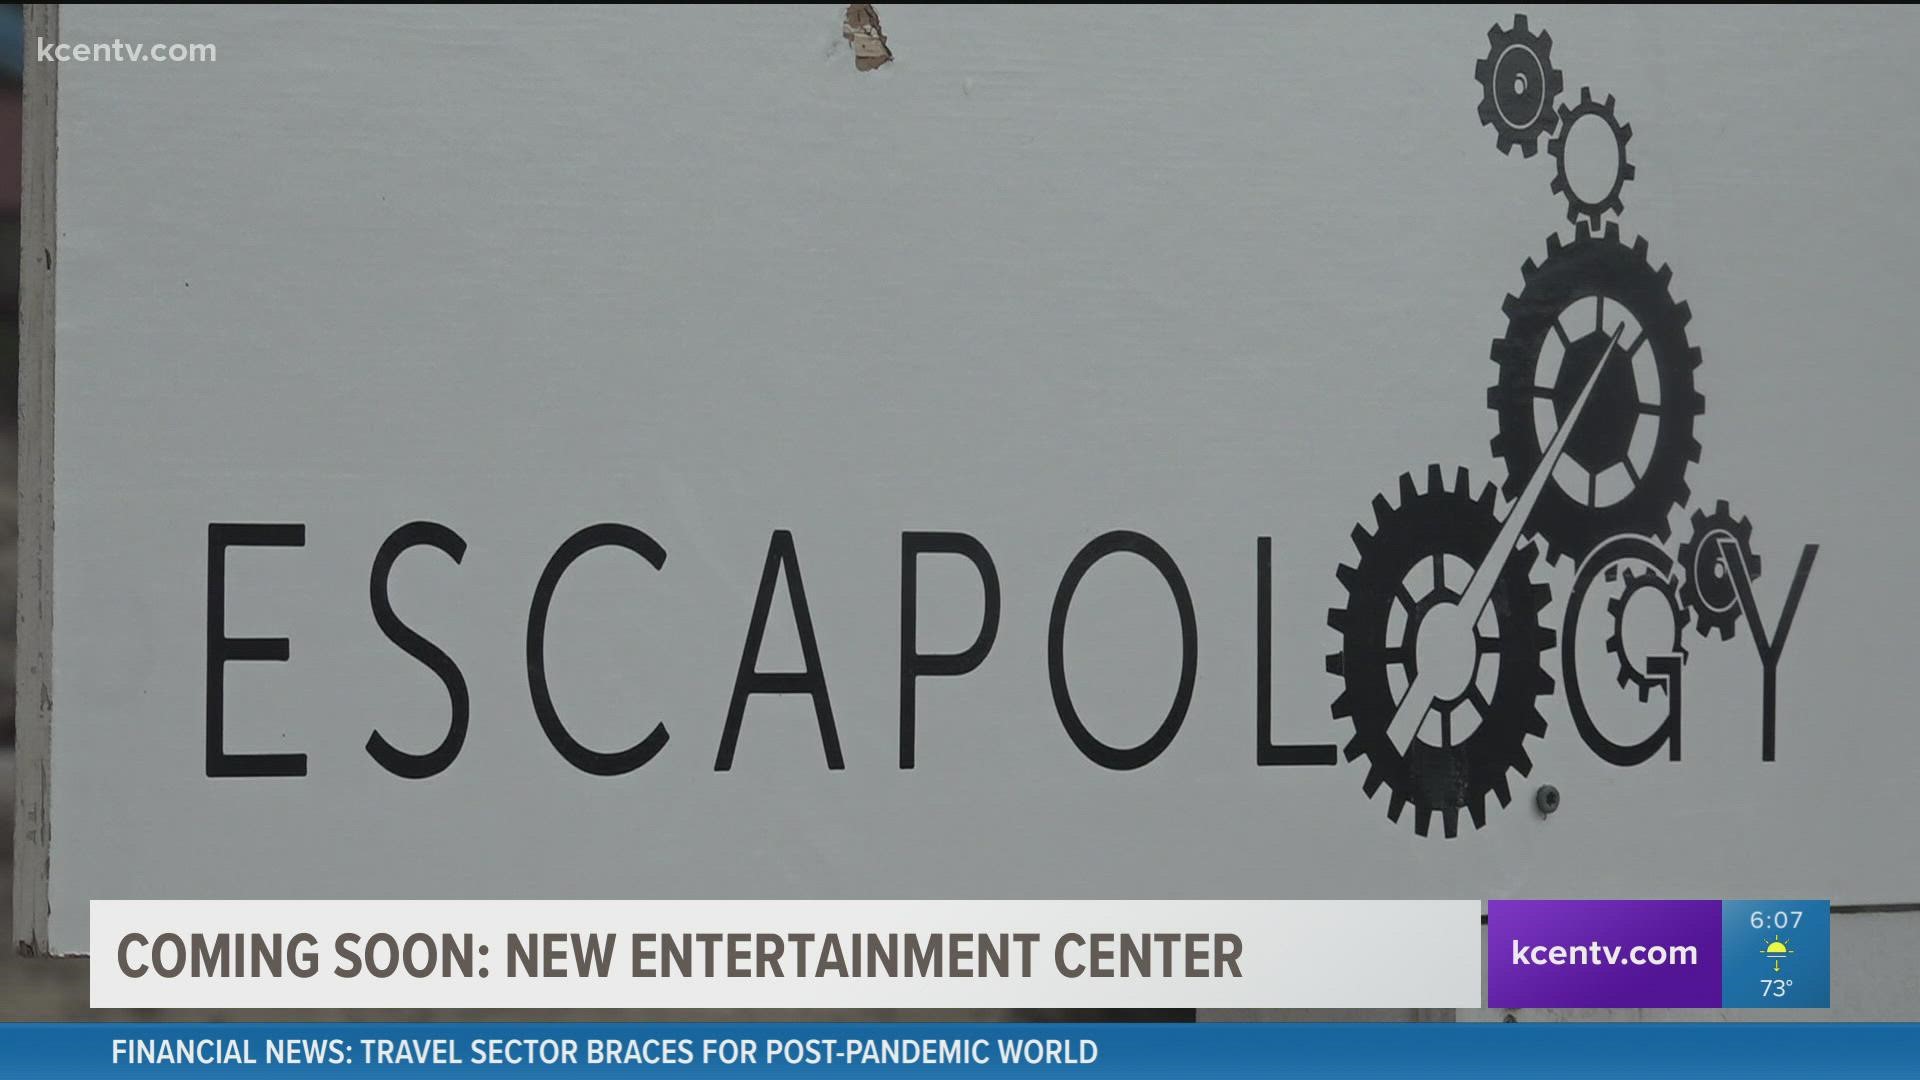 Gambit Social House is a new entertainment center built from the ground up by a Central Texas family. Here's the fun you can expect, including escape rooms!